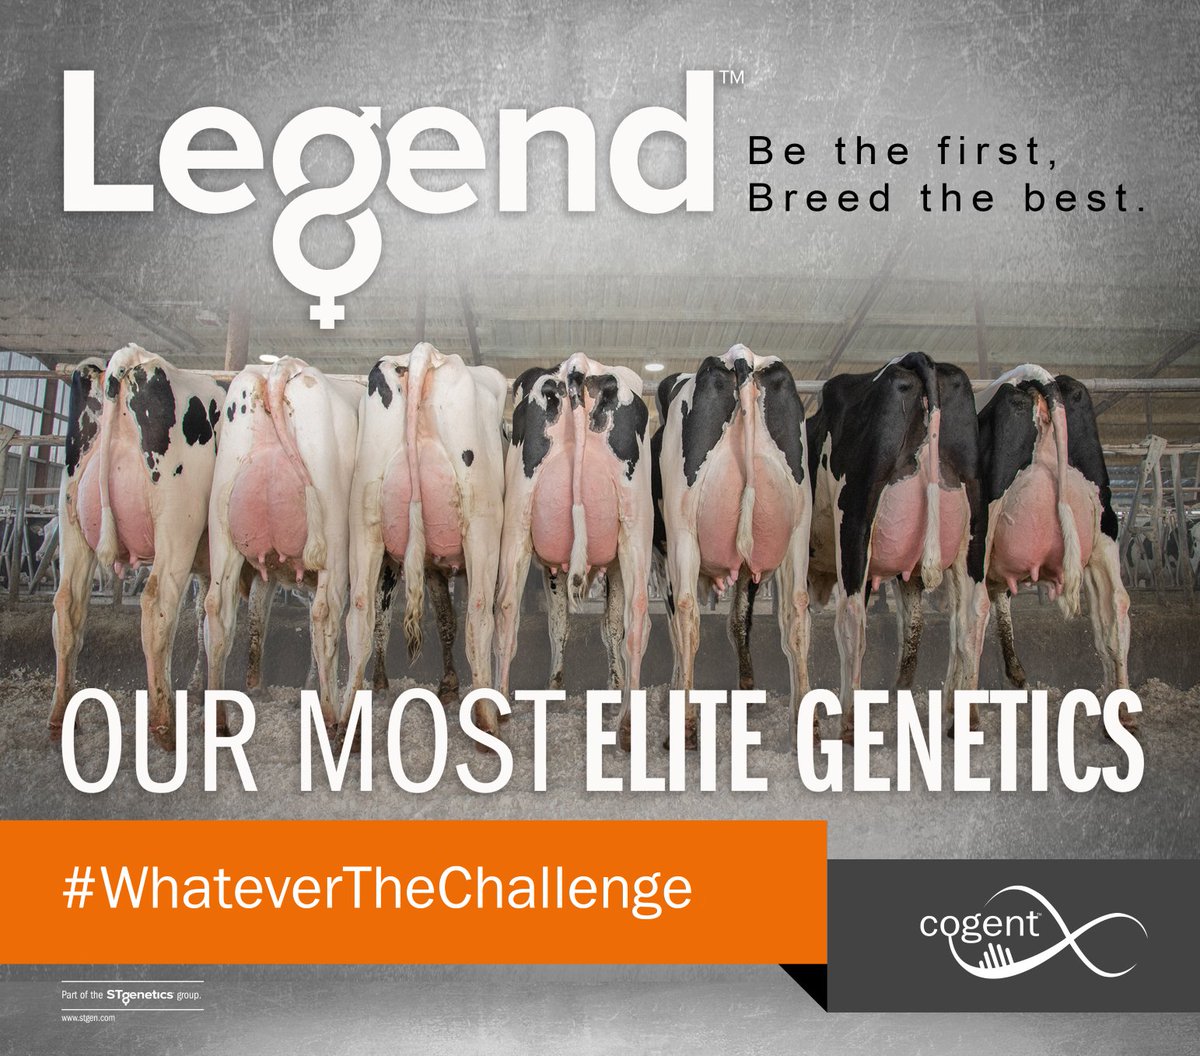 Be the first, breed the best with our most elite genetics! Our Legend programme gives you access to a collection of the worlds most superior genetics. On average Legend herds see up to 3 times faster genetic progress. For more info visit our website. #WhateverTheChallenge